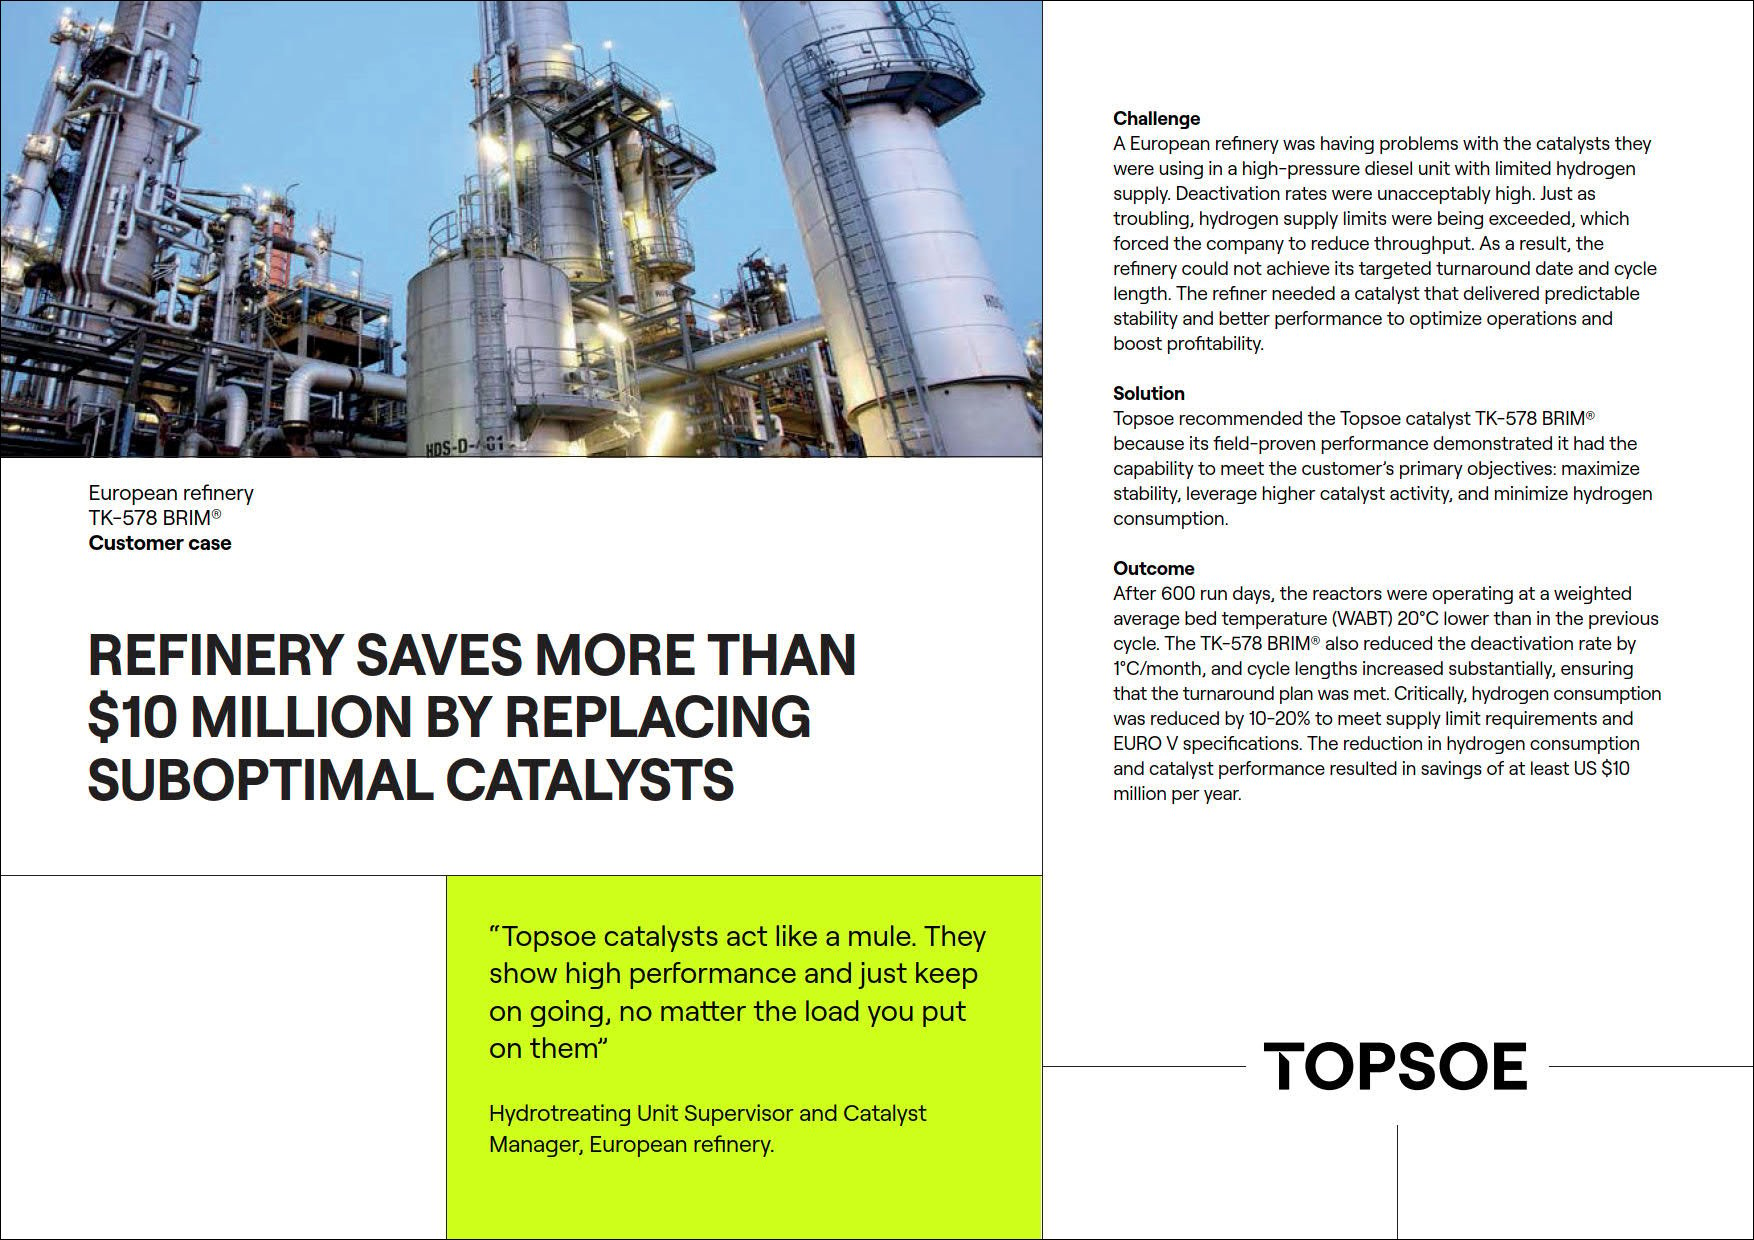 Refinery saves more than $10 million by replacing suboptimal catalysts